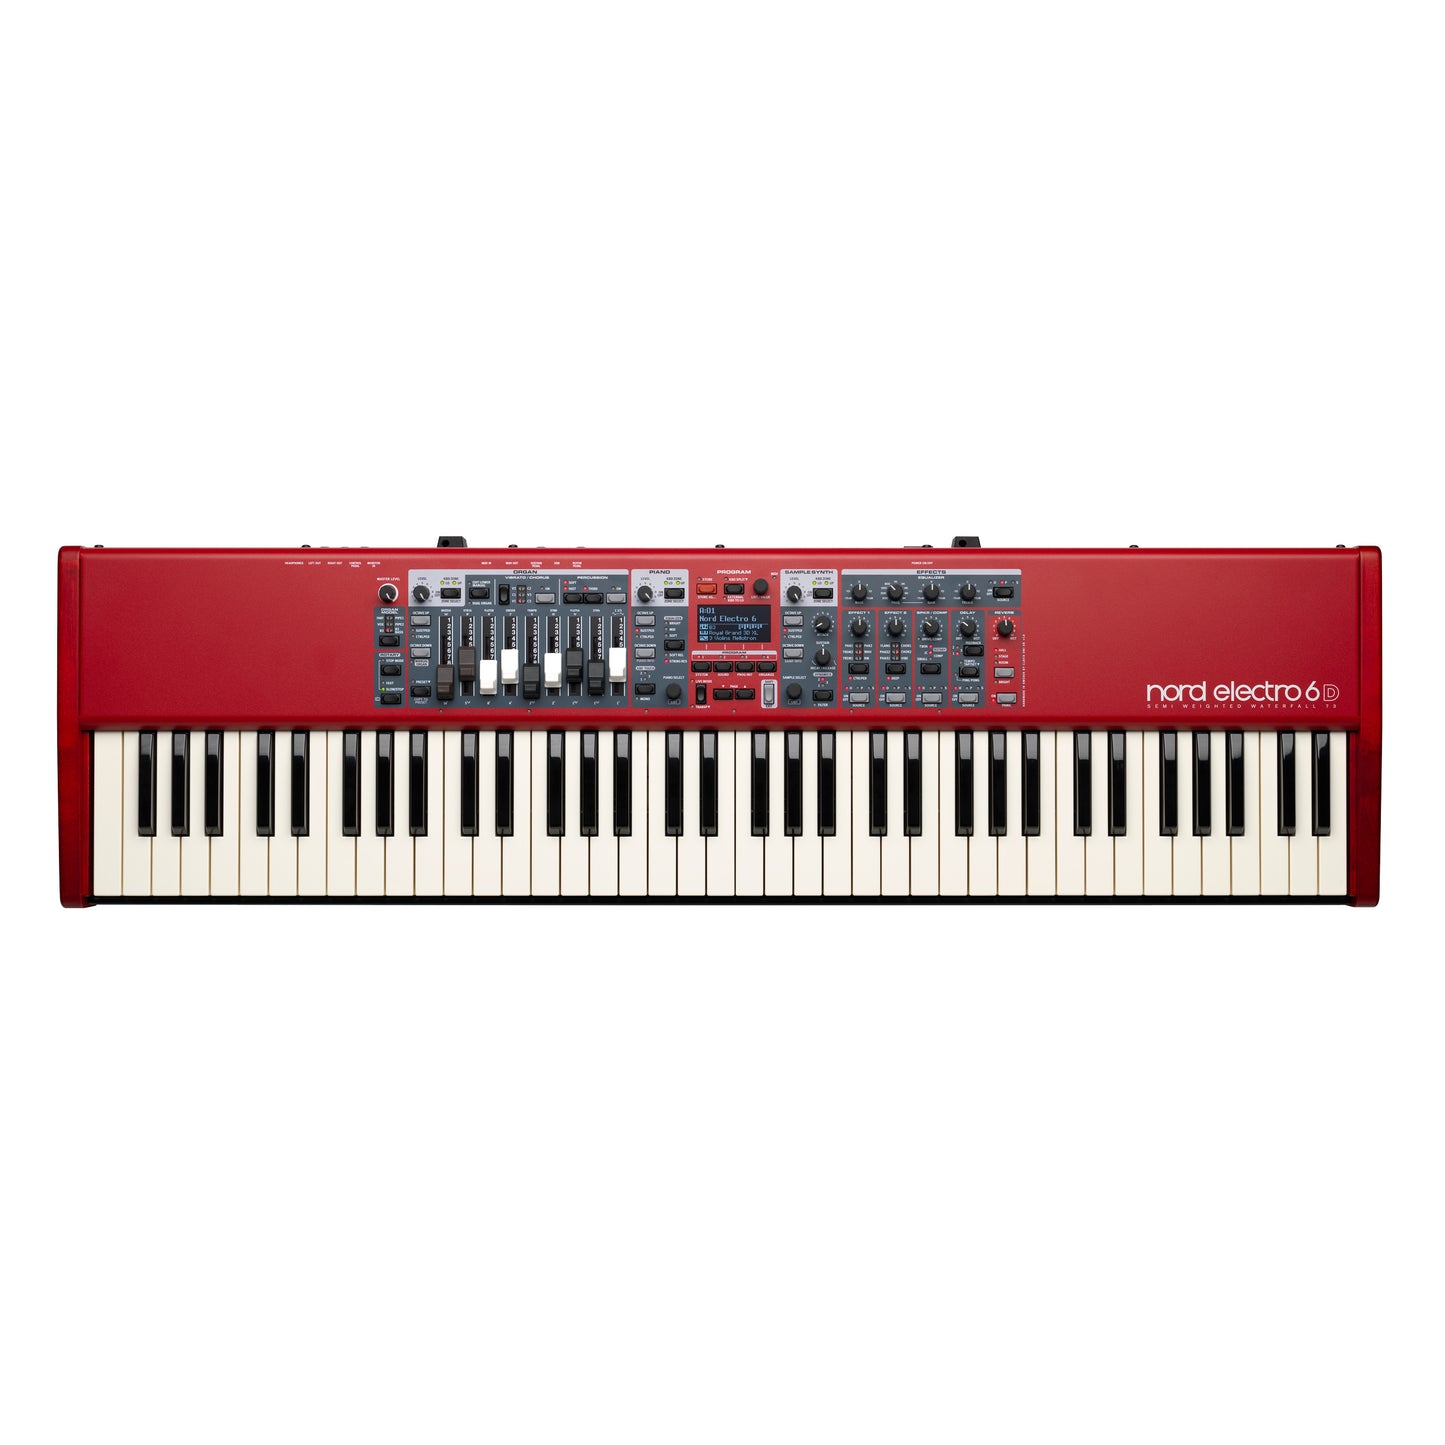 Nord Electro 6D 73 Keyboard with 73-note Semi-Weighted Waterfall Keybed